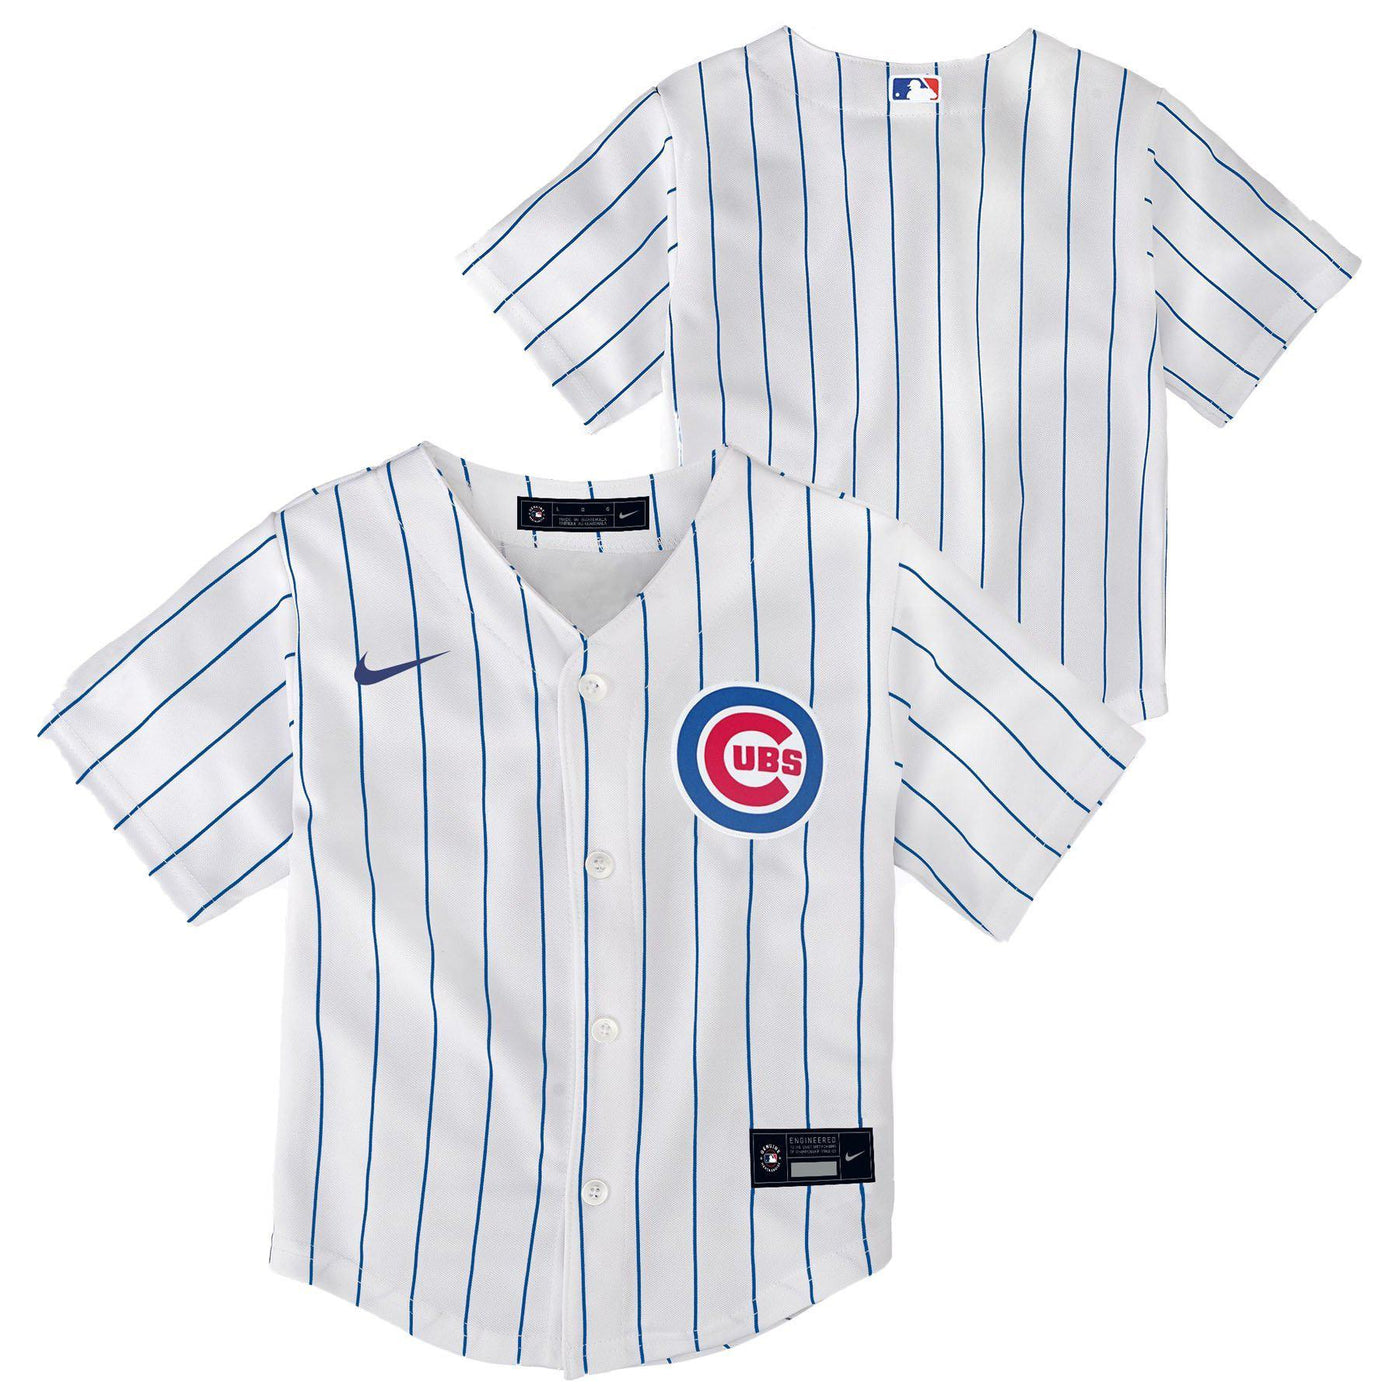 REPLICA YOUTH CHICAGO CUBS JERSEY - HOME - Ivy Shop